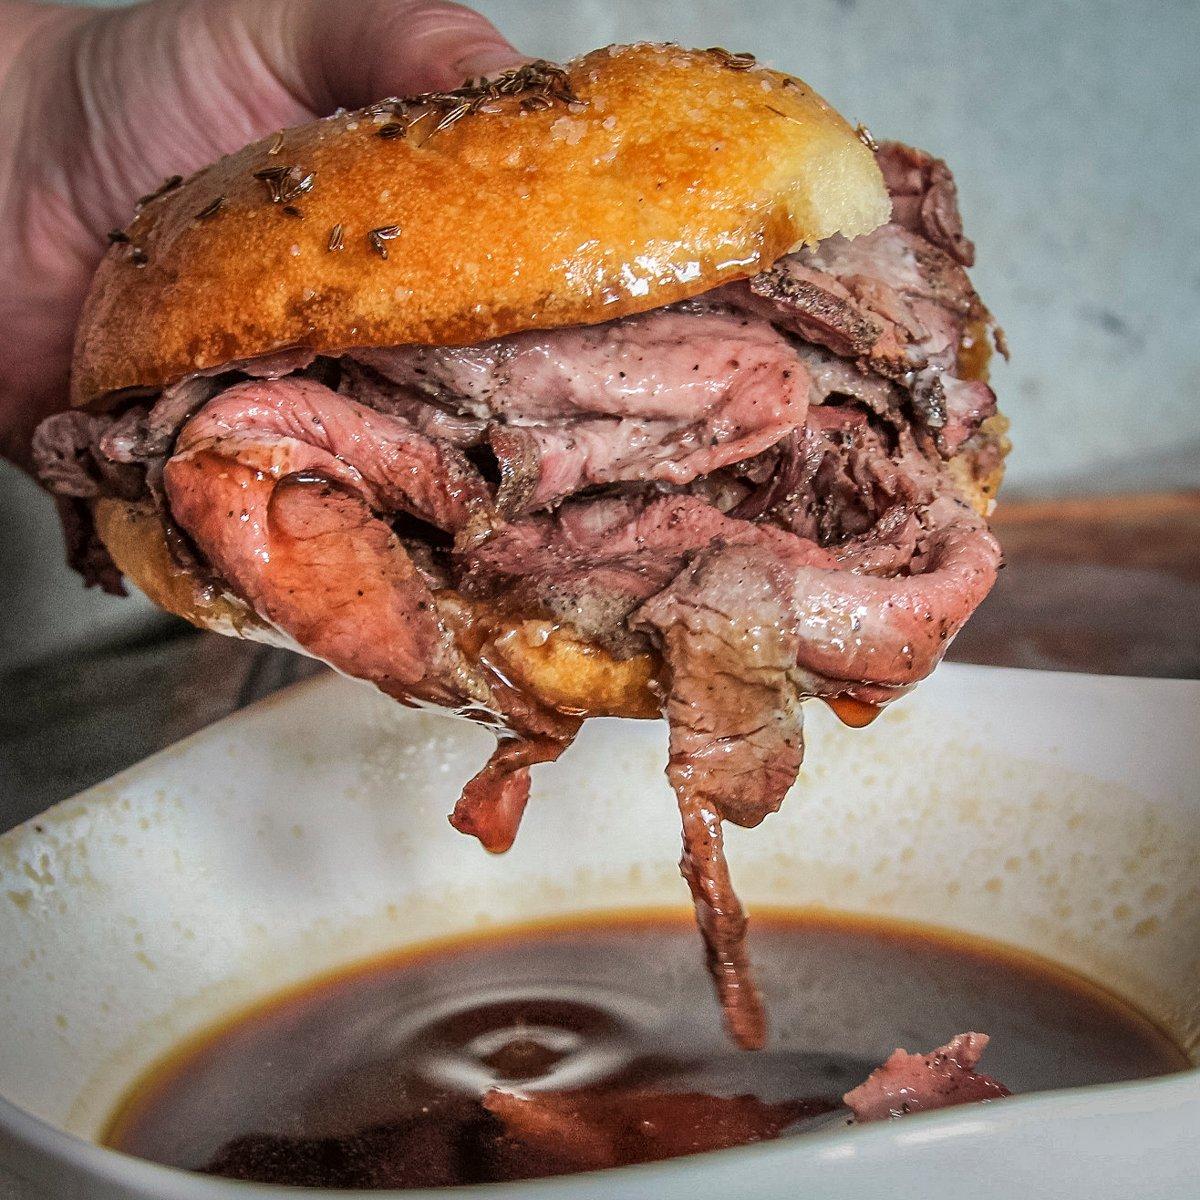 Serve the sandwich with a bowl of au jus for dipping.